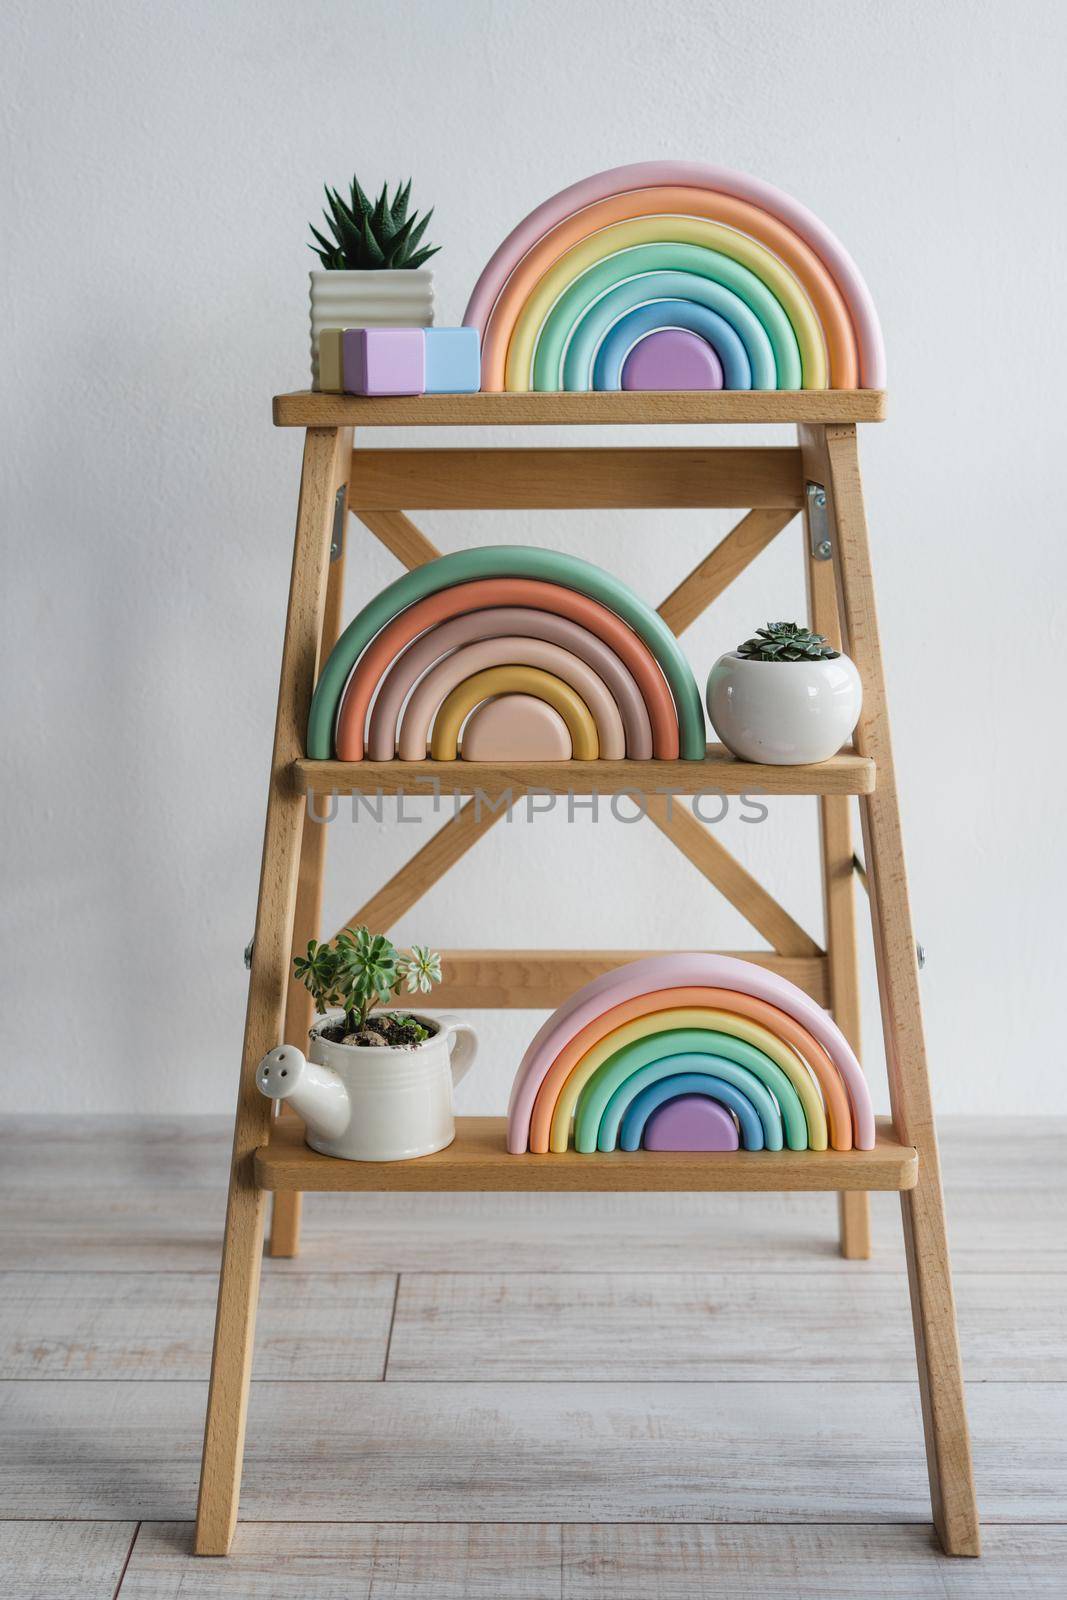 Decor for children's room. Wooden rainbows made of natural material. by Rodnova